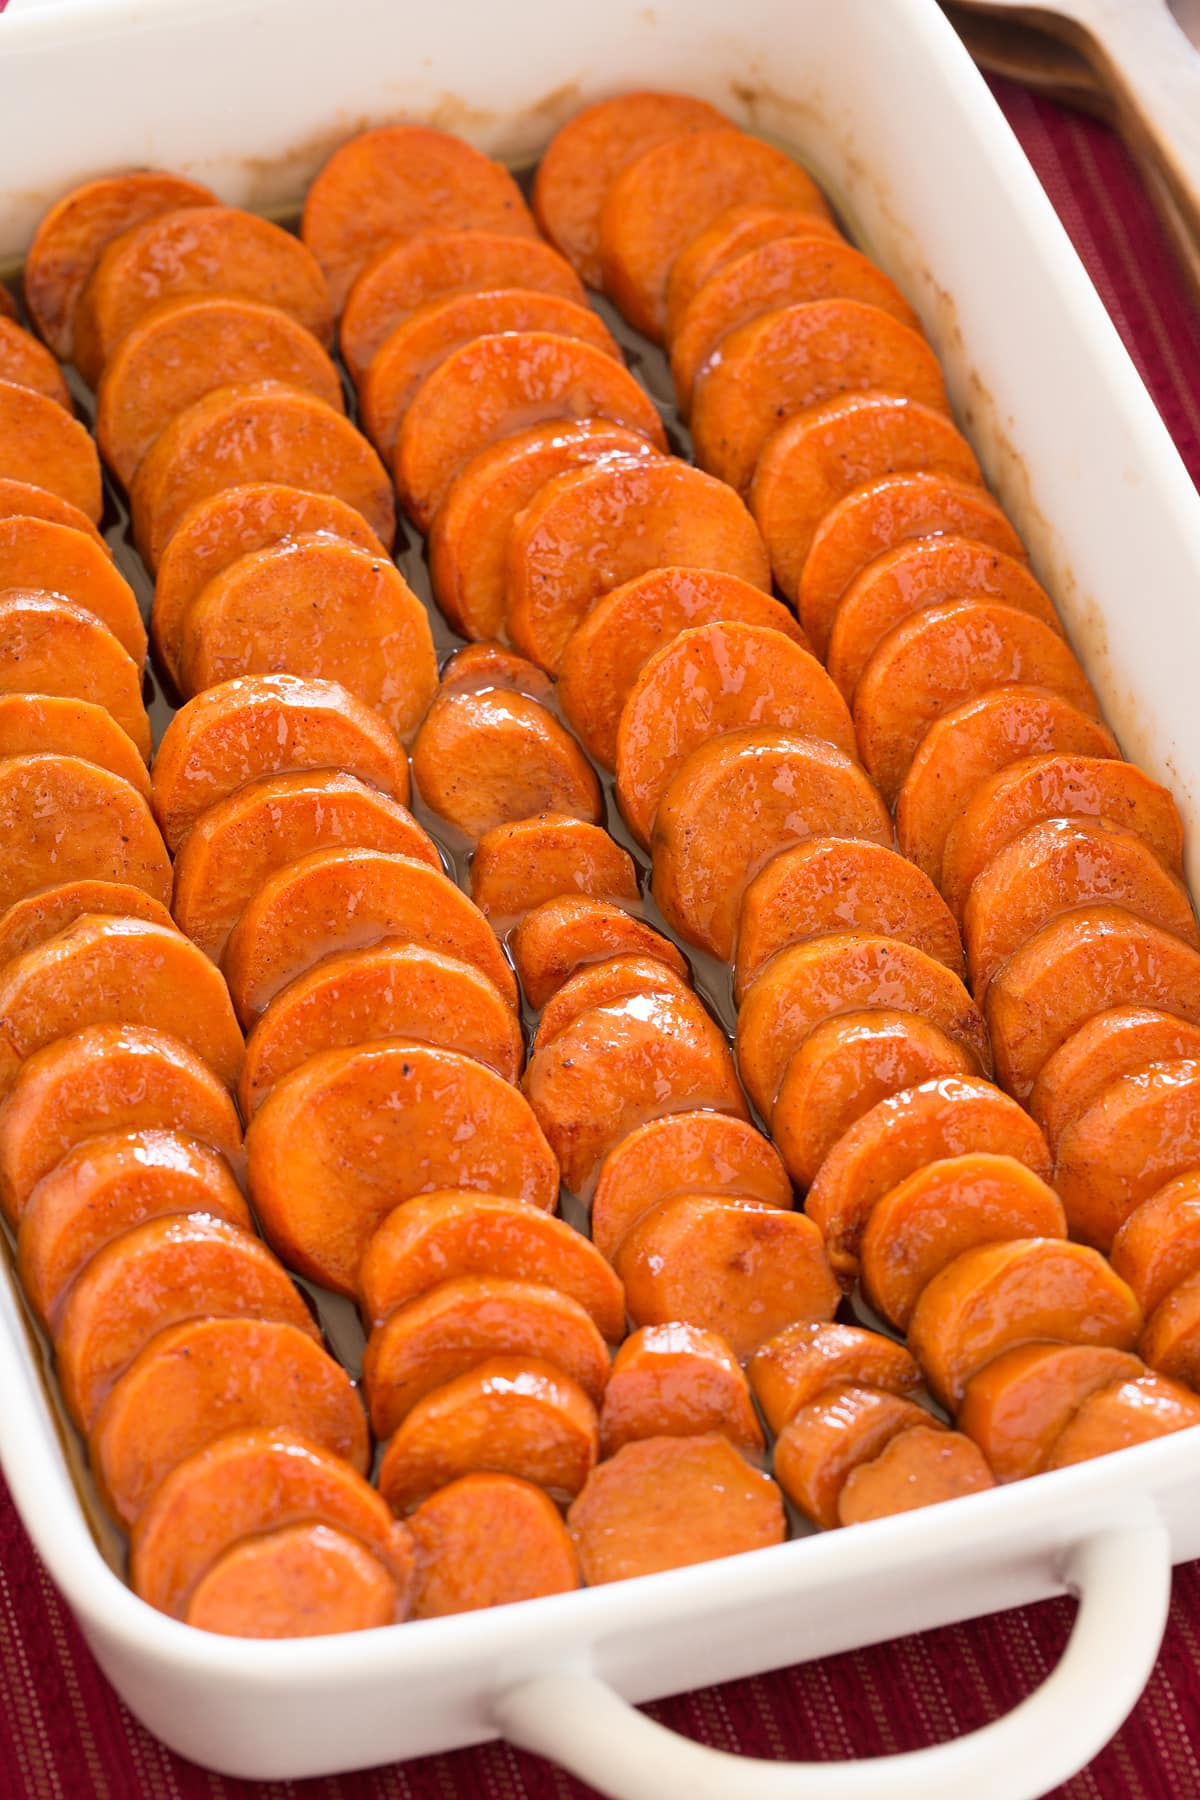 Candied yams. Sweet potatoes are shown in rows in a casserole dish, they are coated in a butter, brown sugar sauce.